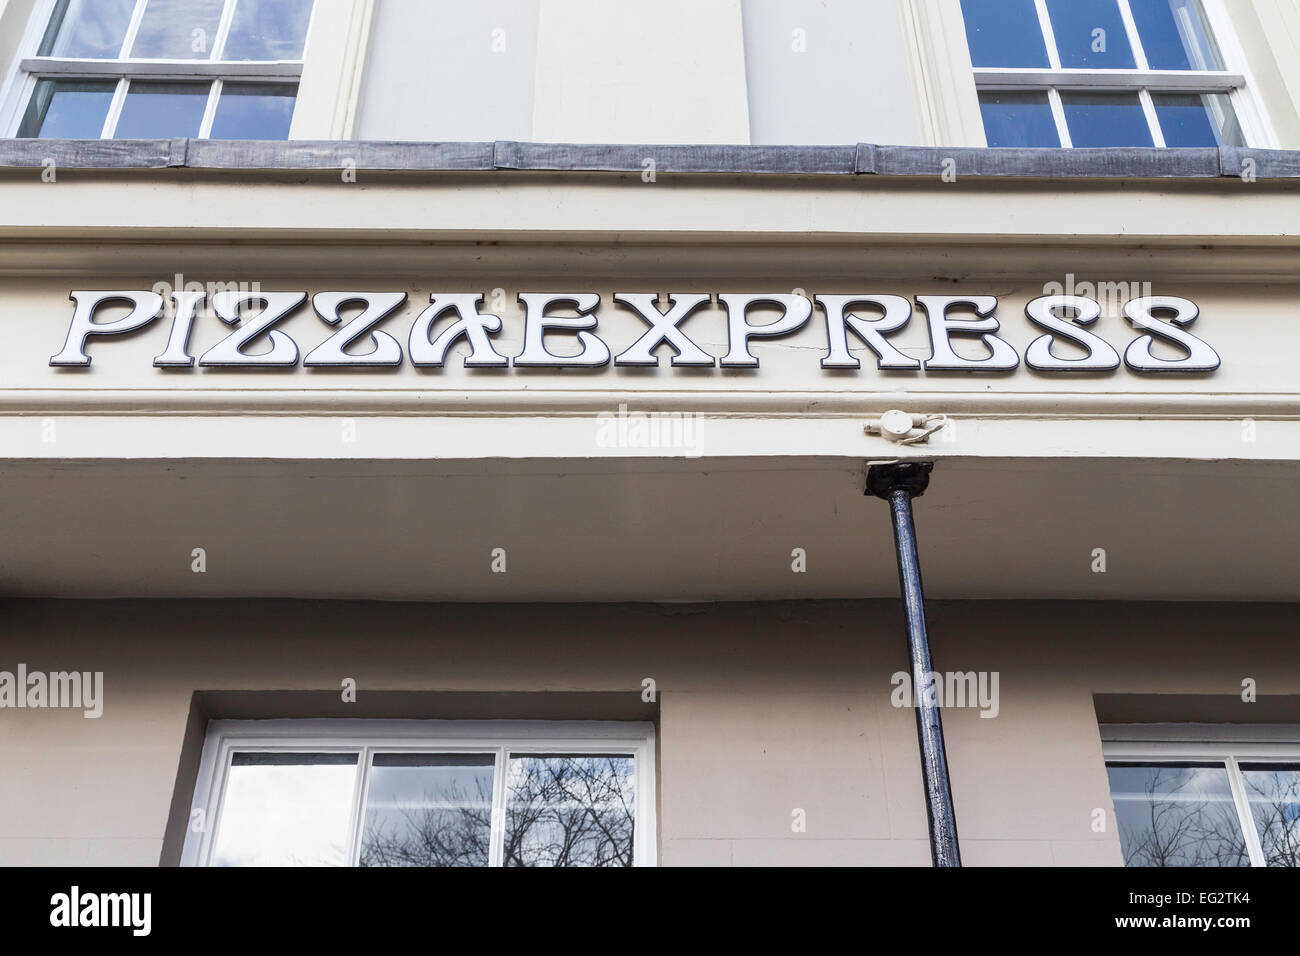 Pizza Express restaurant sign with parts of windows in the photo. Stock Photo